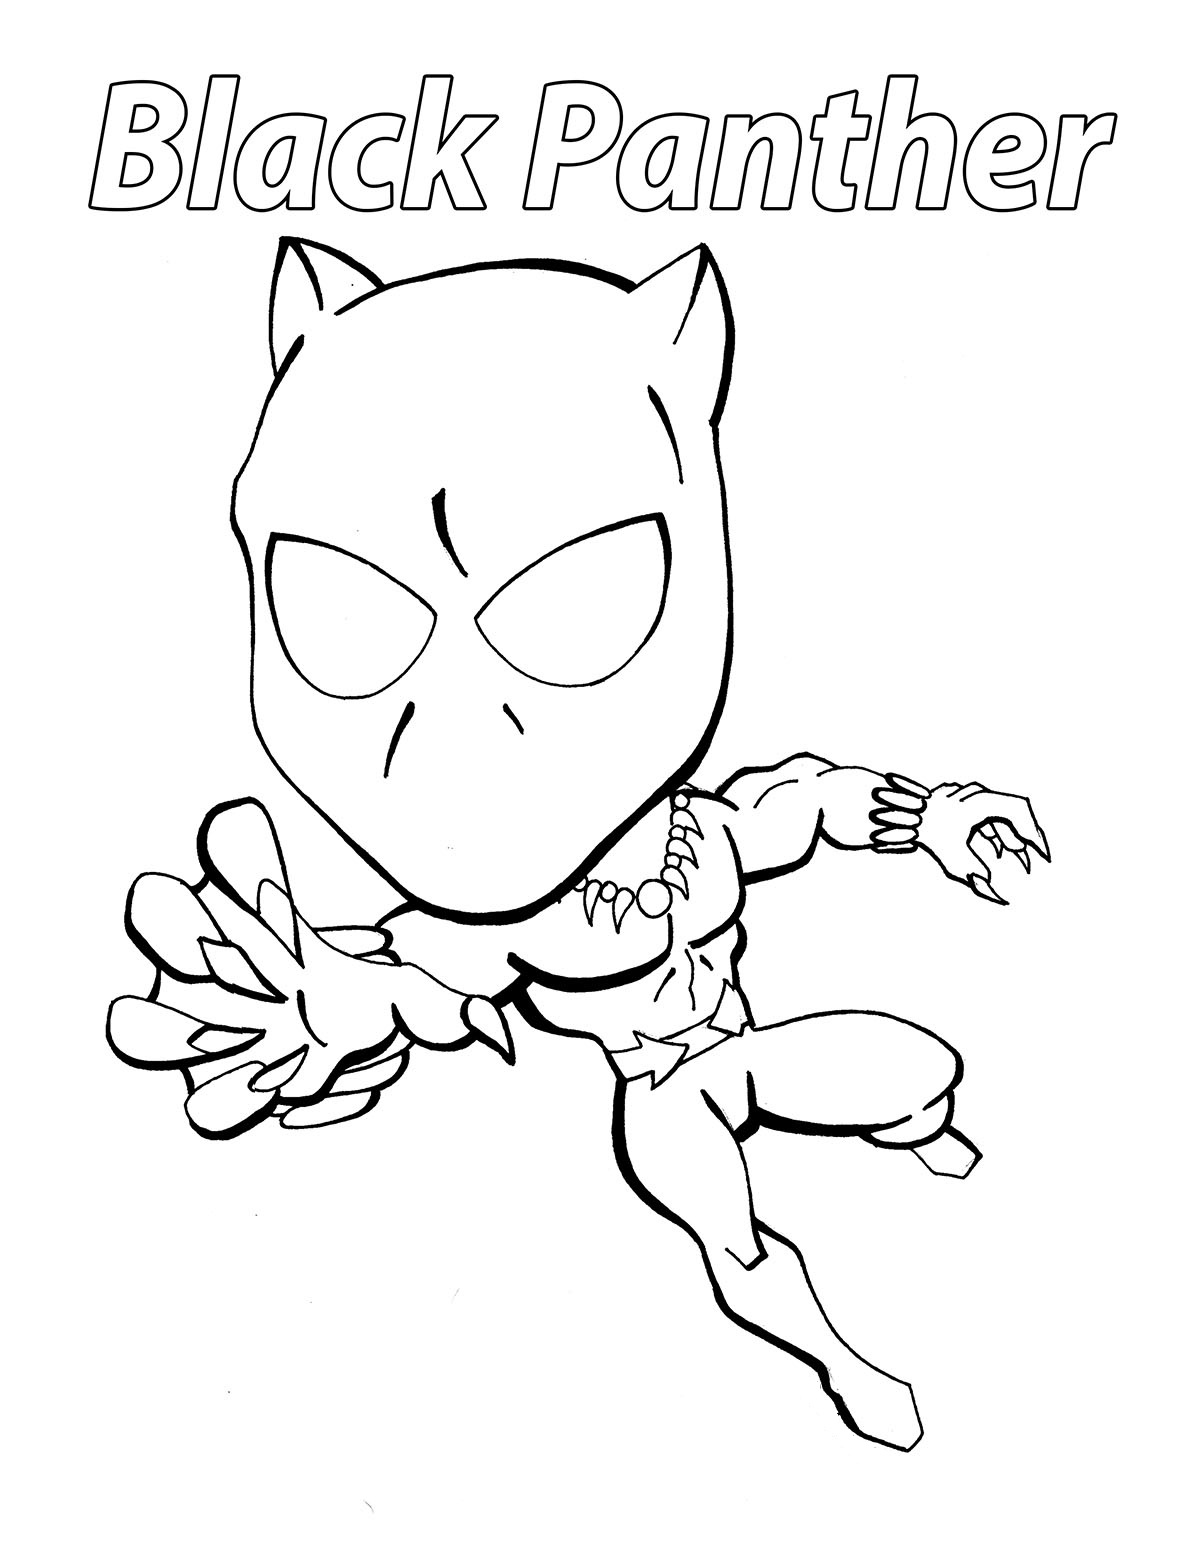 Black Panther Coloring Pages at GetColorings.com | Free printable